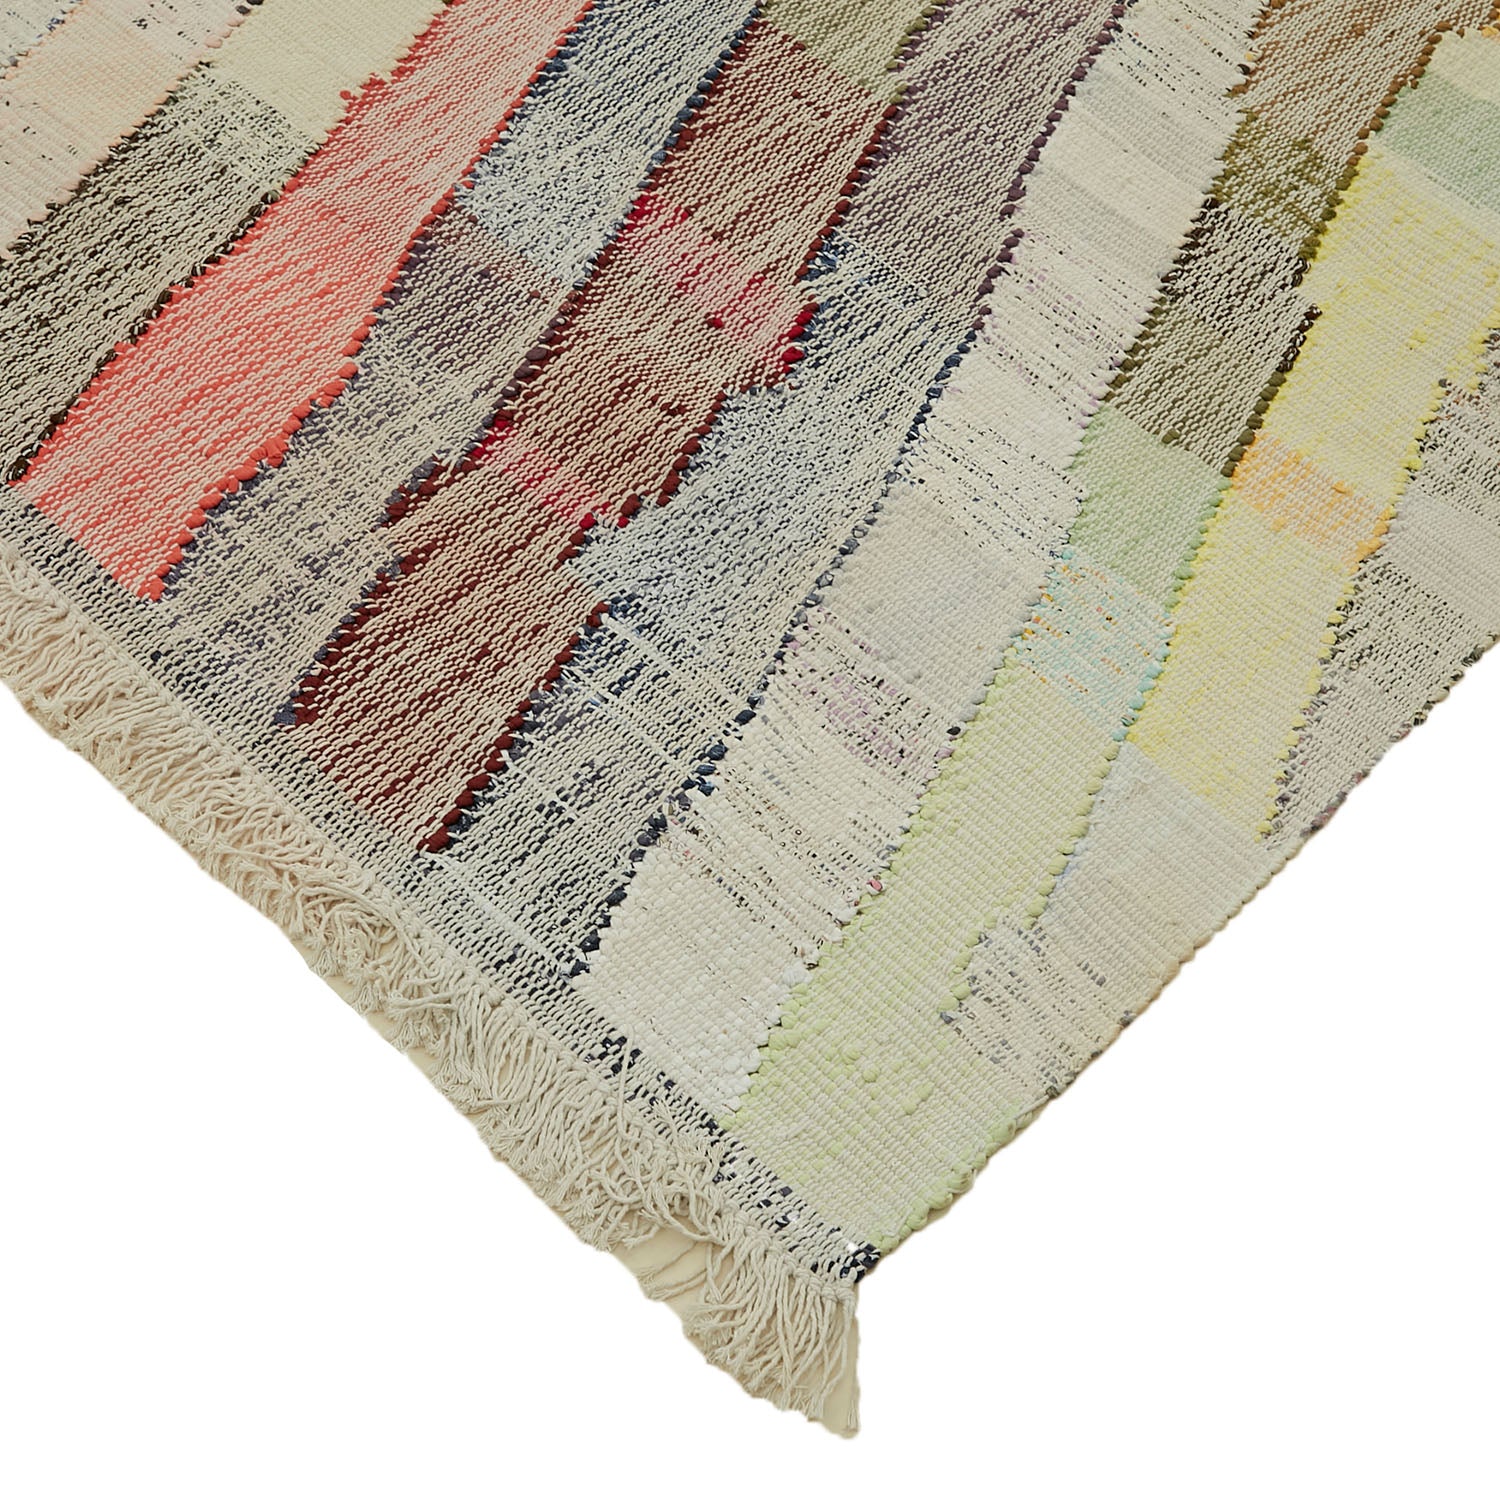 Handwoven rug with vibrant striped pattern and fringed edges displayed.